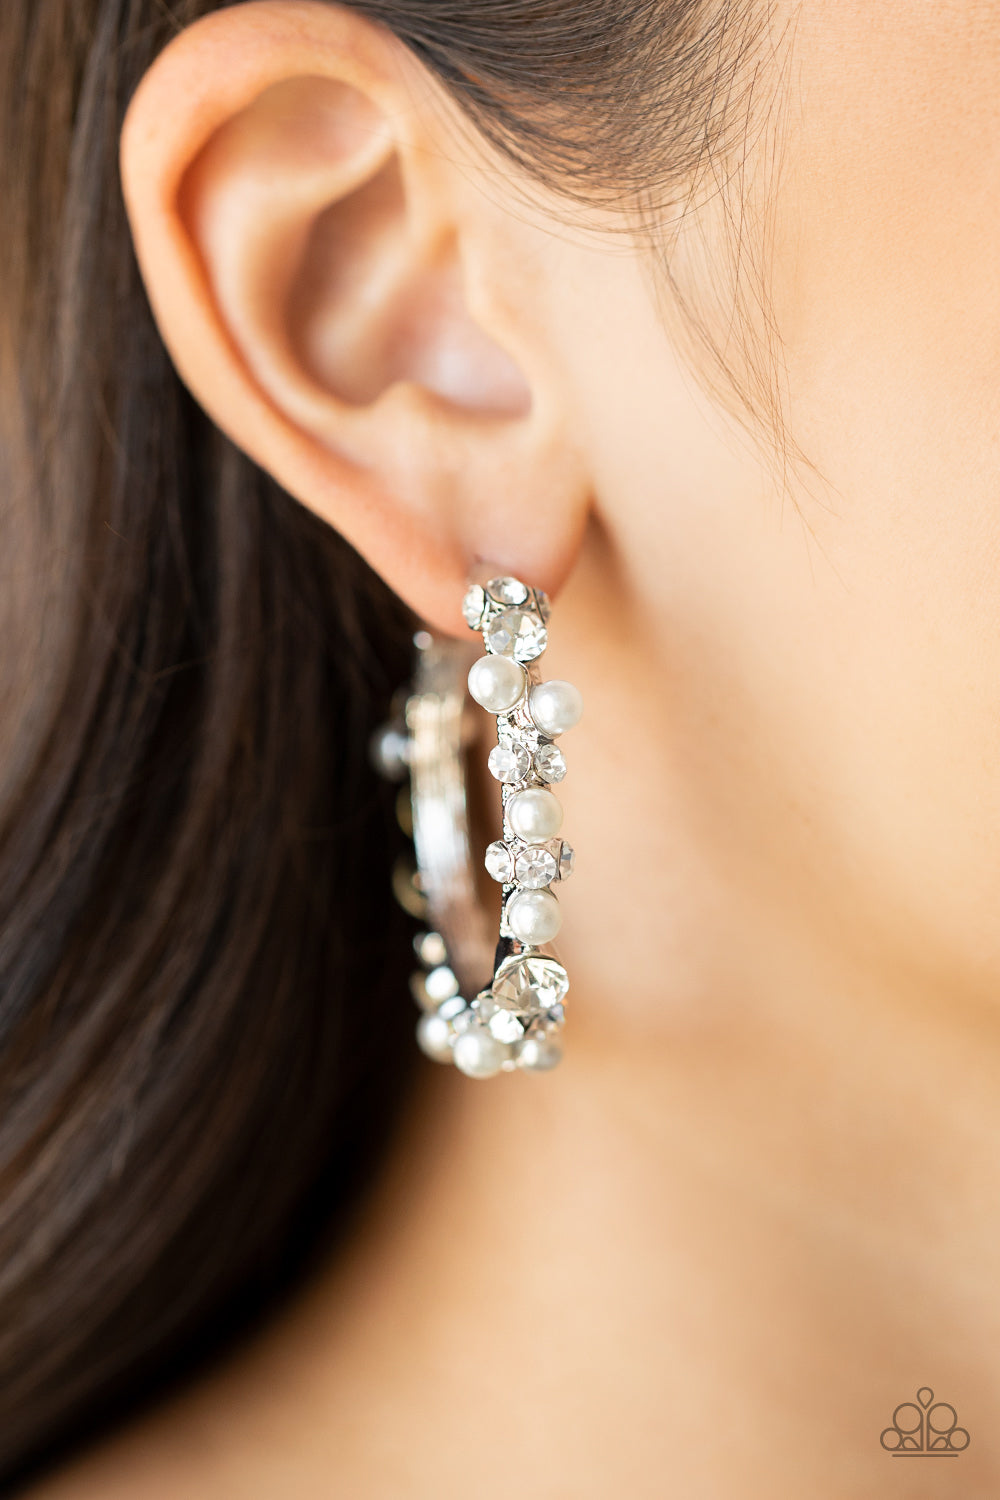 Let There Be SOCIALITE - White Earrings - Paparazzi Accessories 